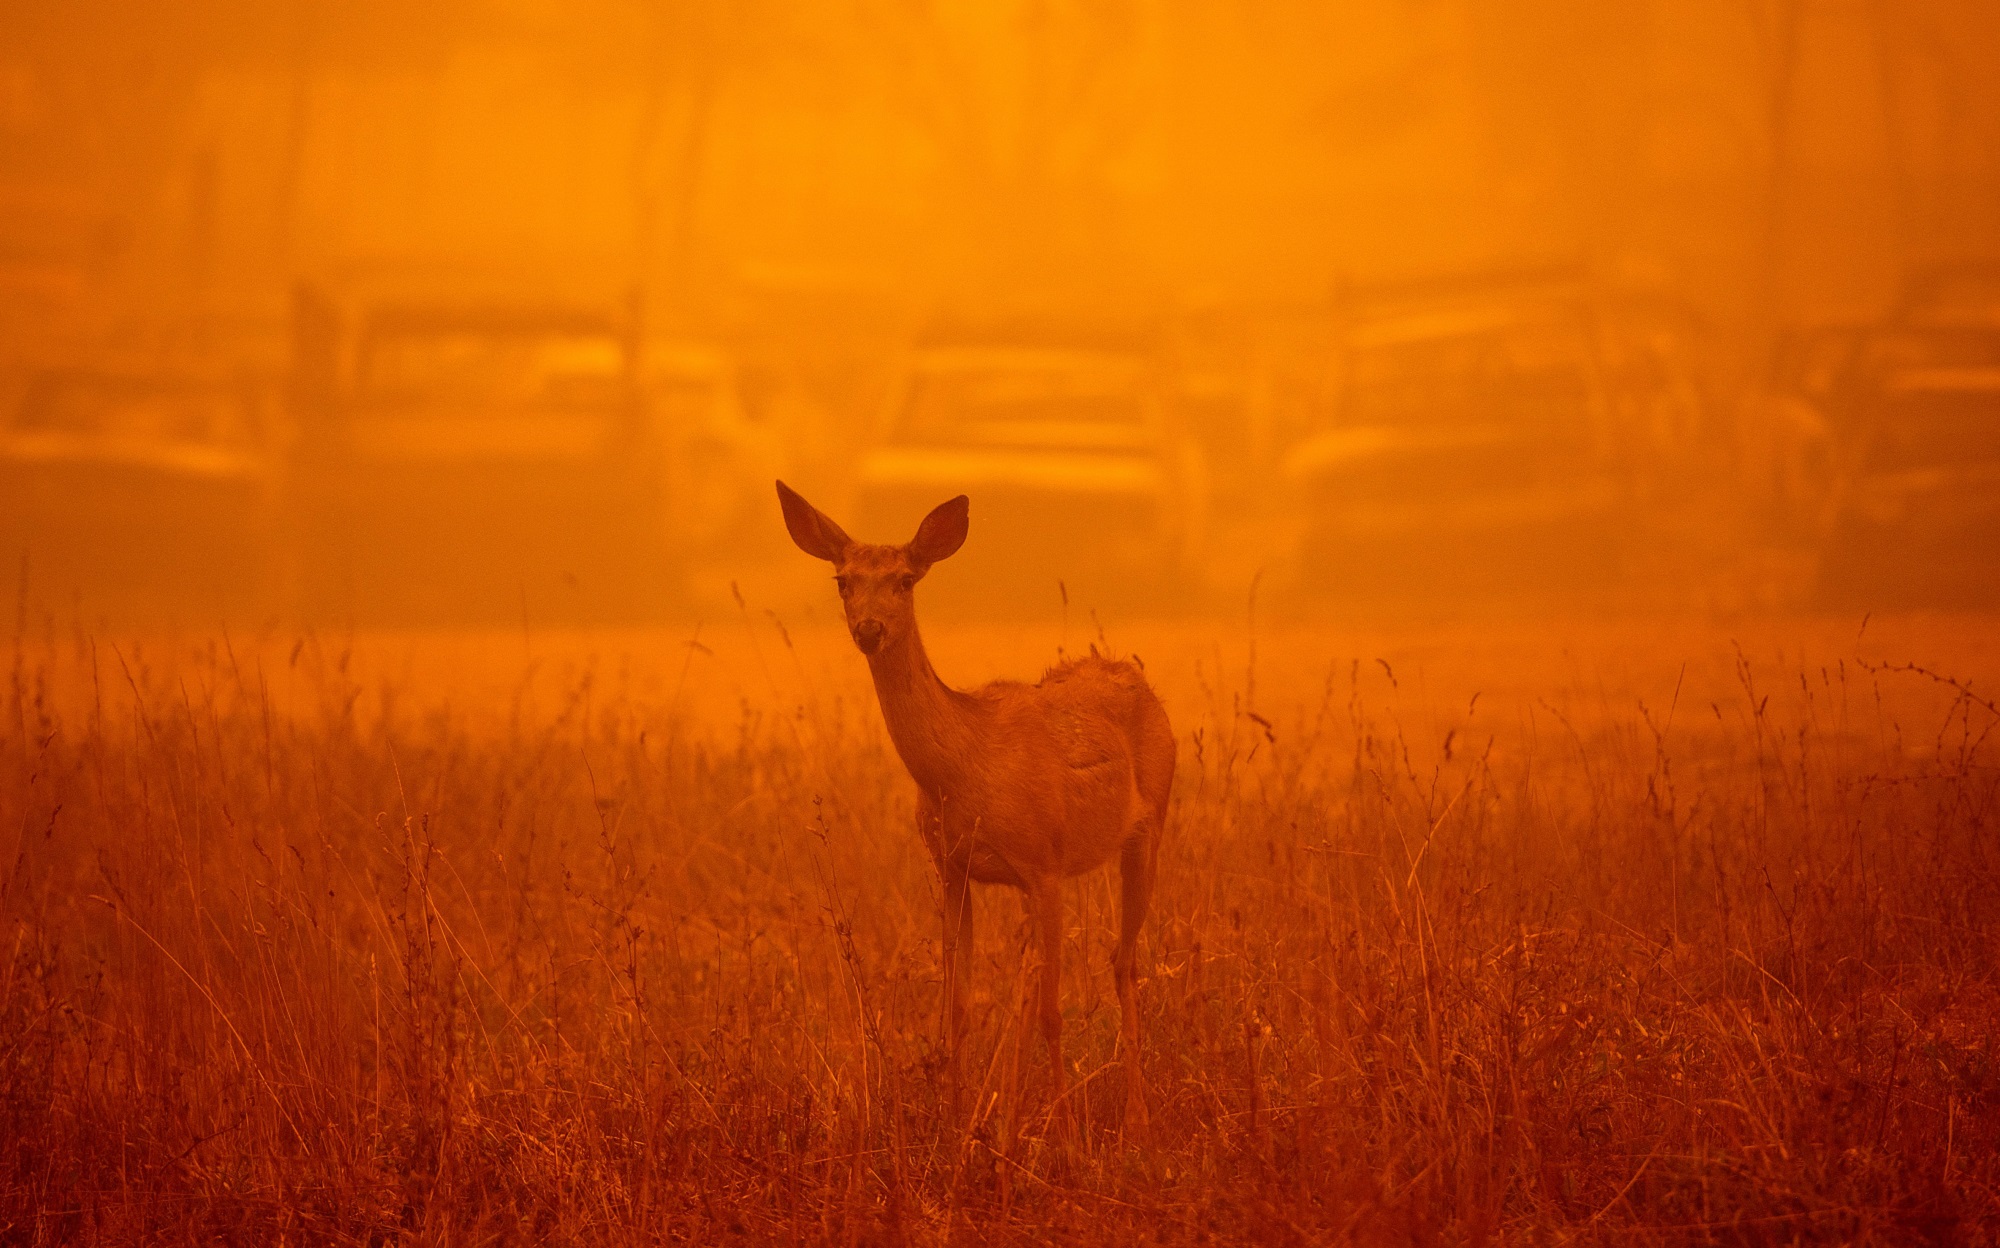 Deer and other animals in wildfire smoke during California Dixie fire in 2021